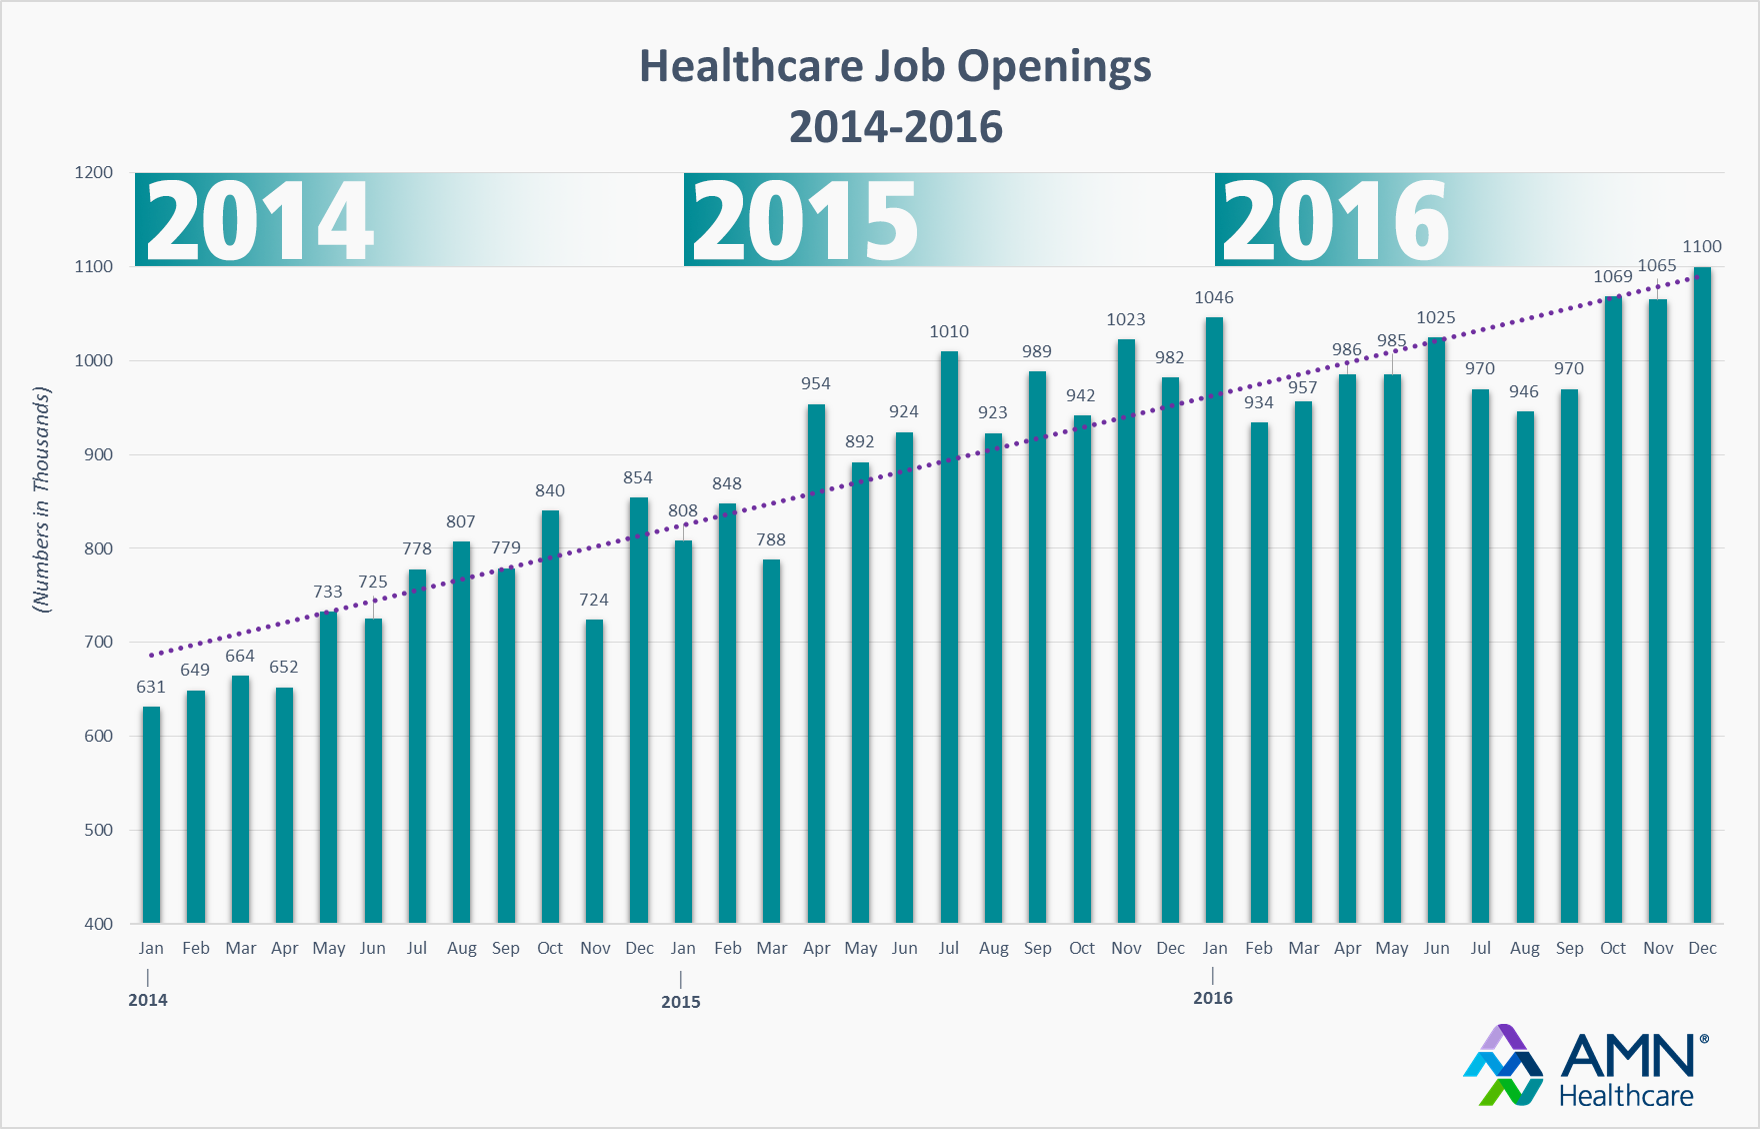 Healthcare Job Openings 2014 to 2016